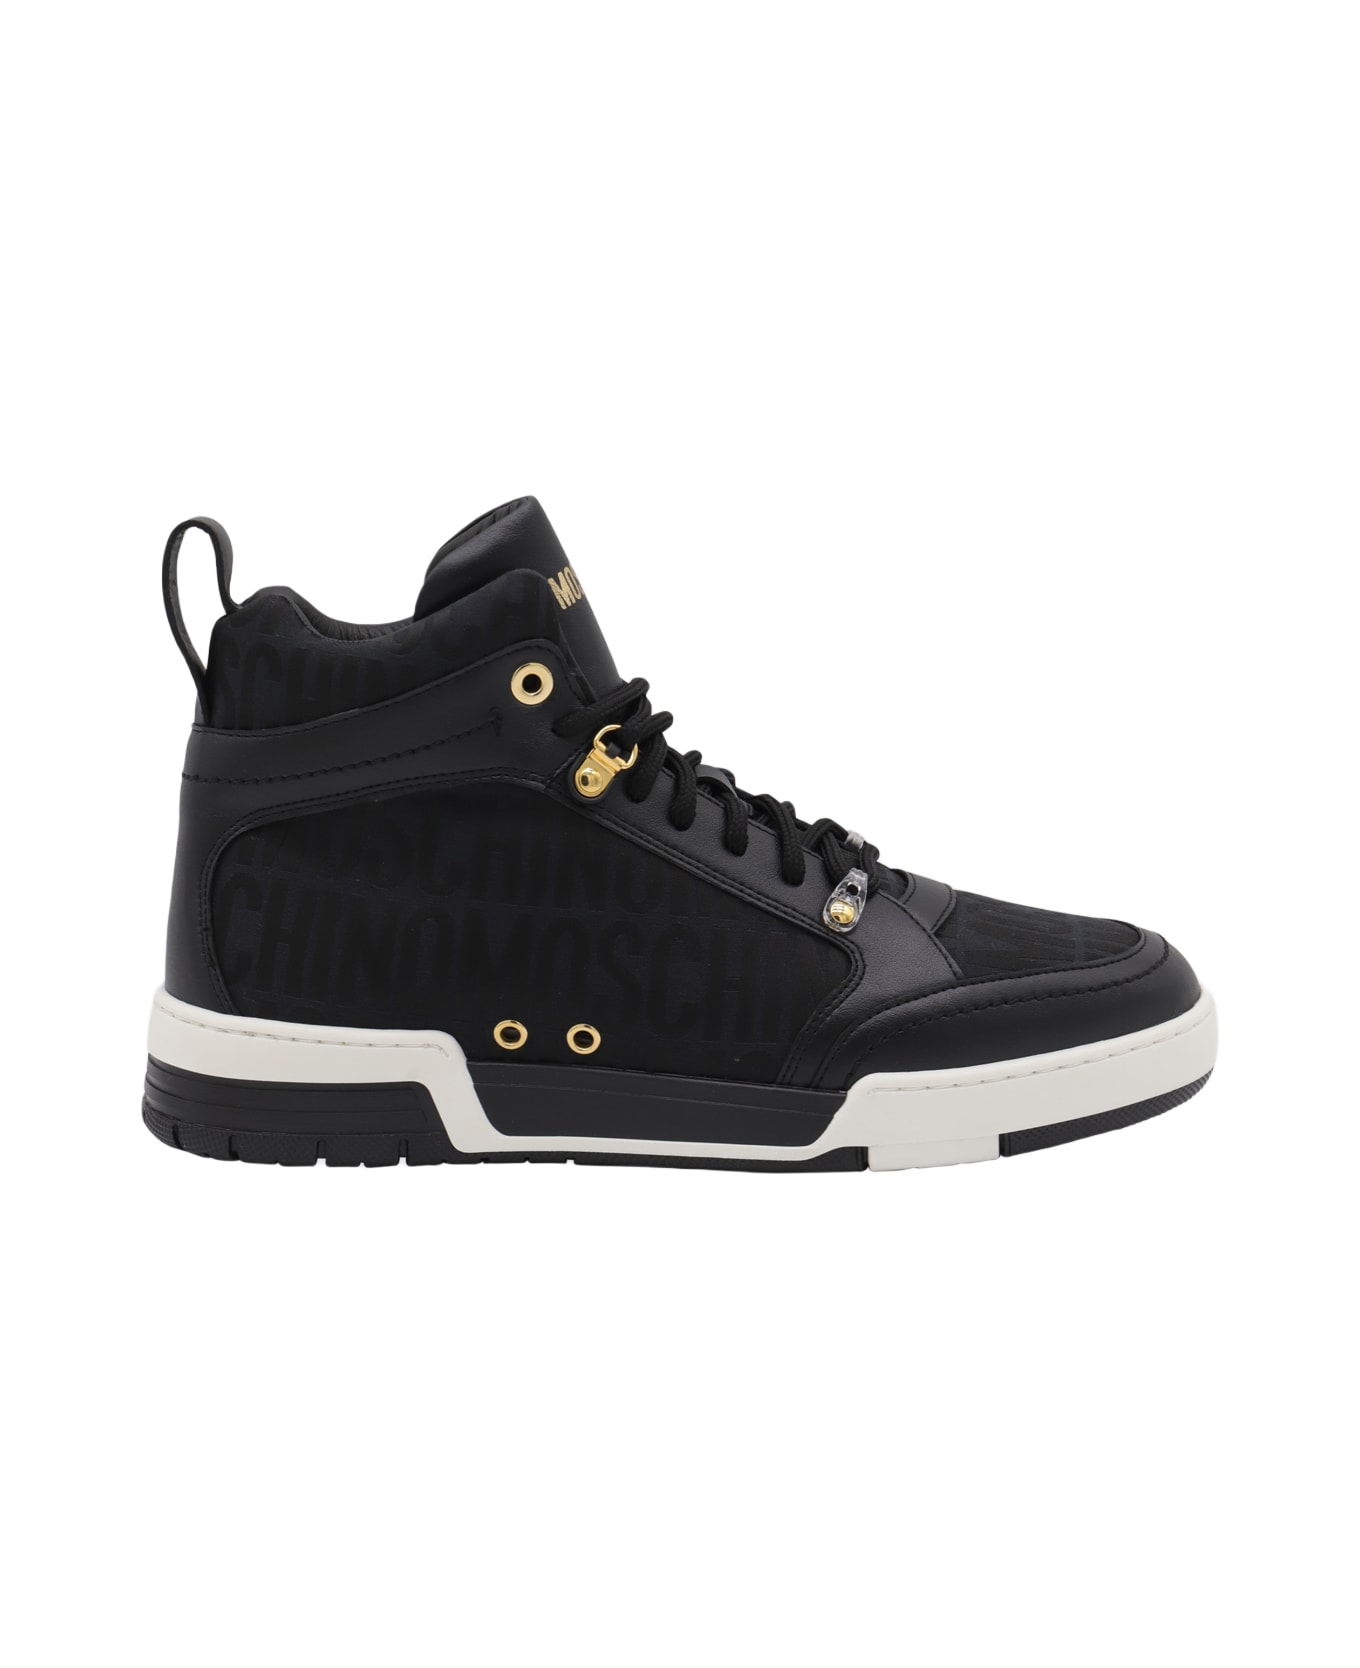 Moschino Black Leather And Canvas Monogram Jacquard High Top Sneakers - Black